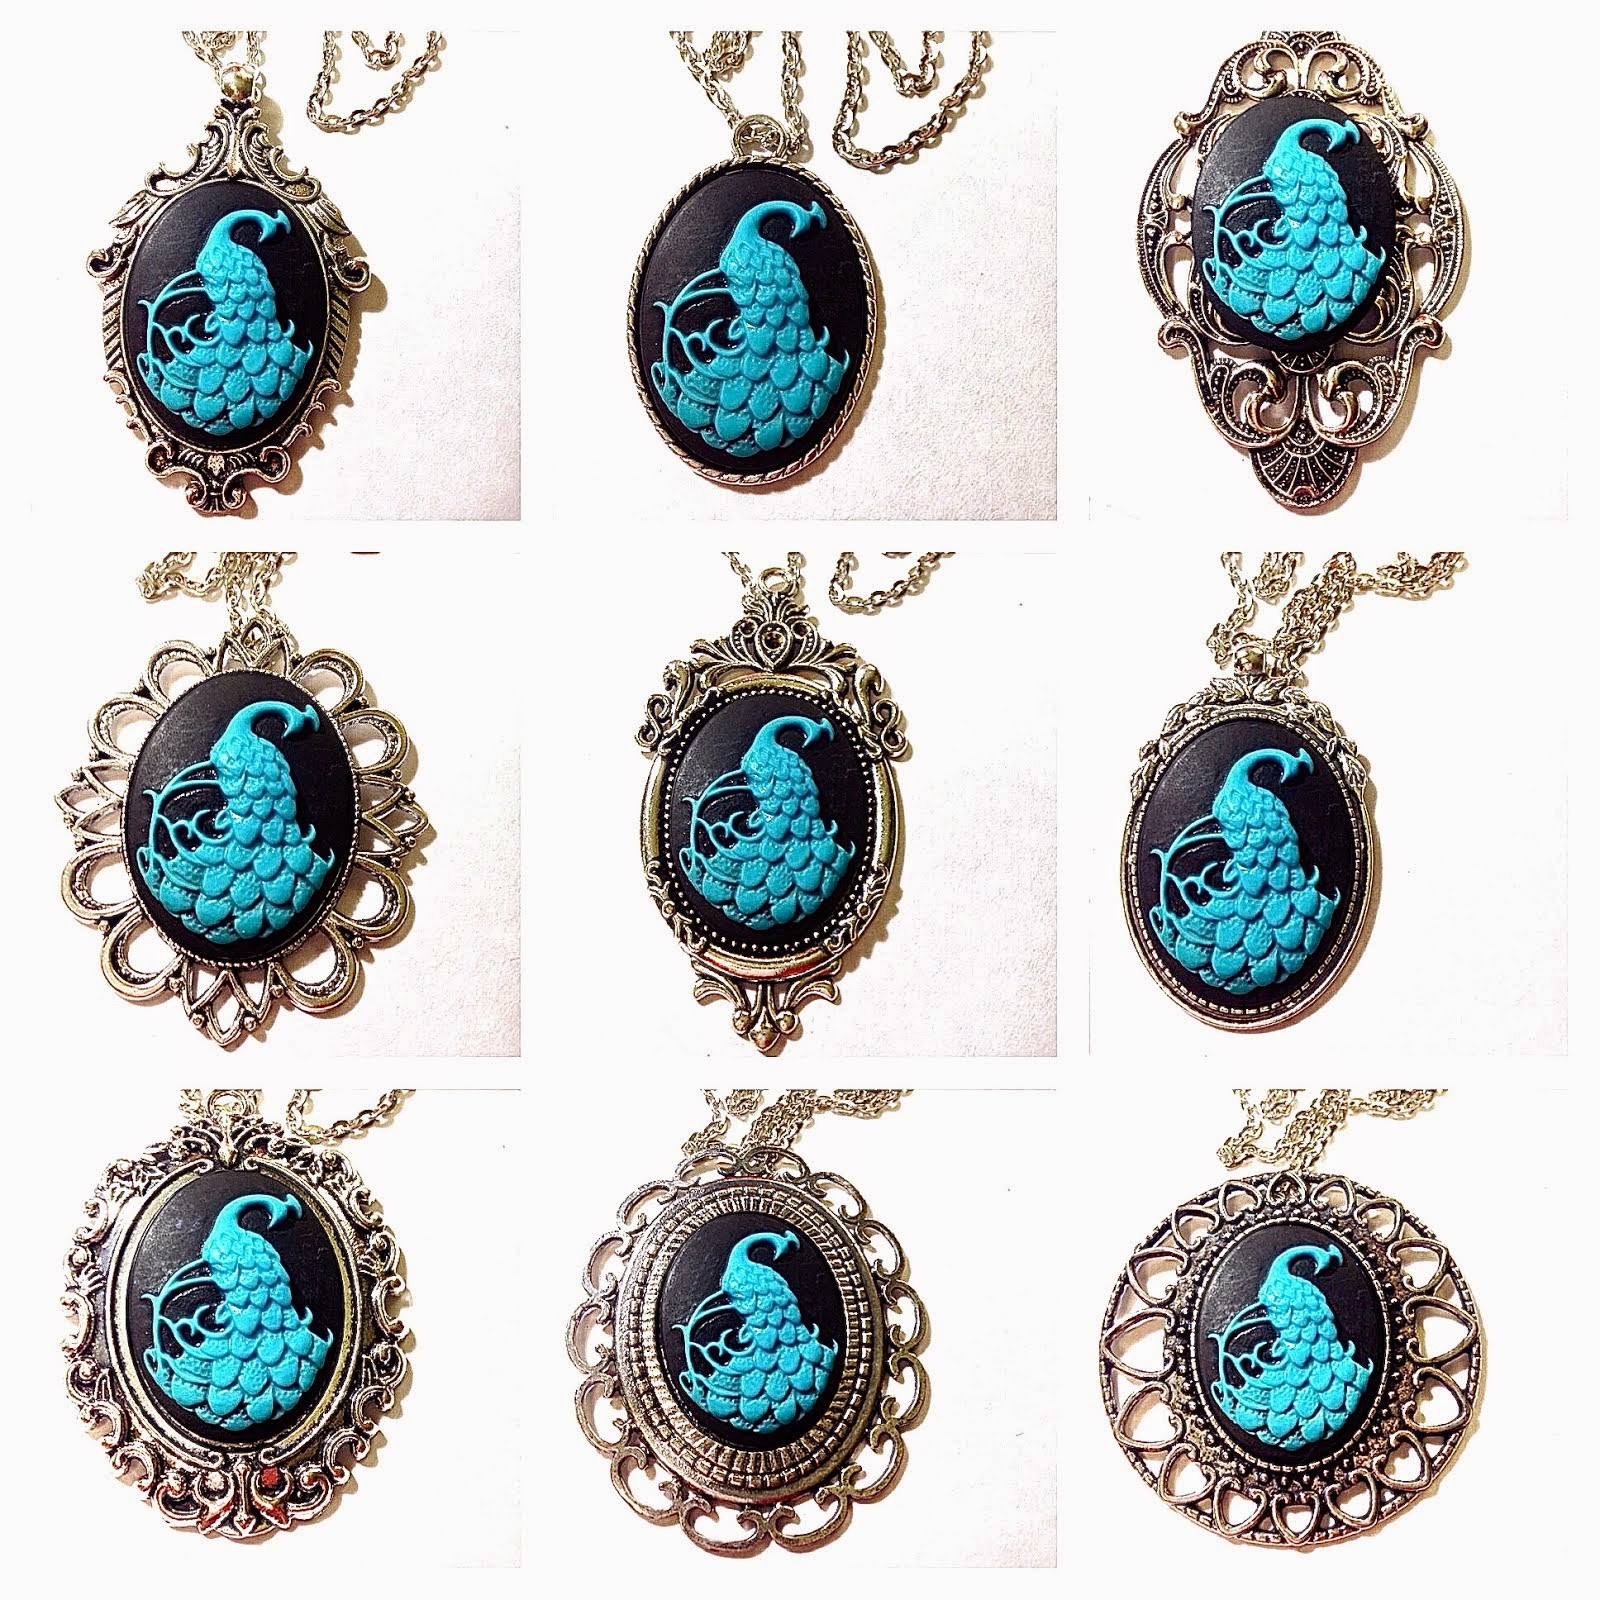 Different Cameo Setting styles and the lovely peacock cameo